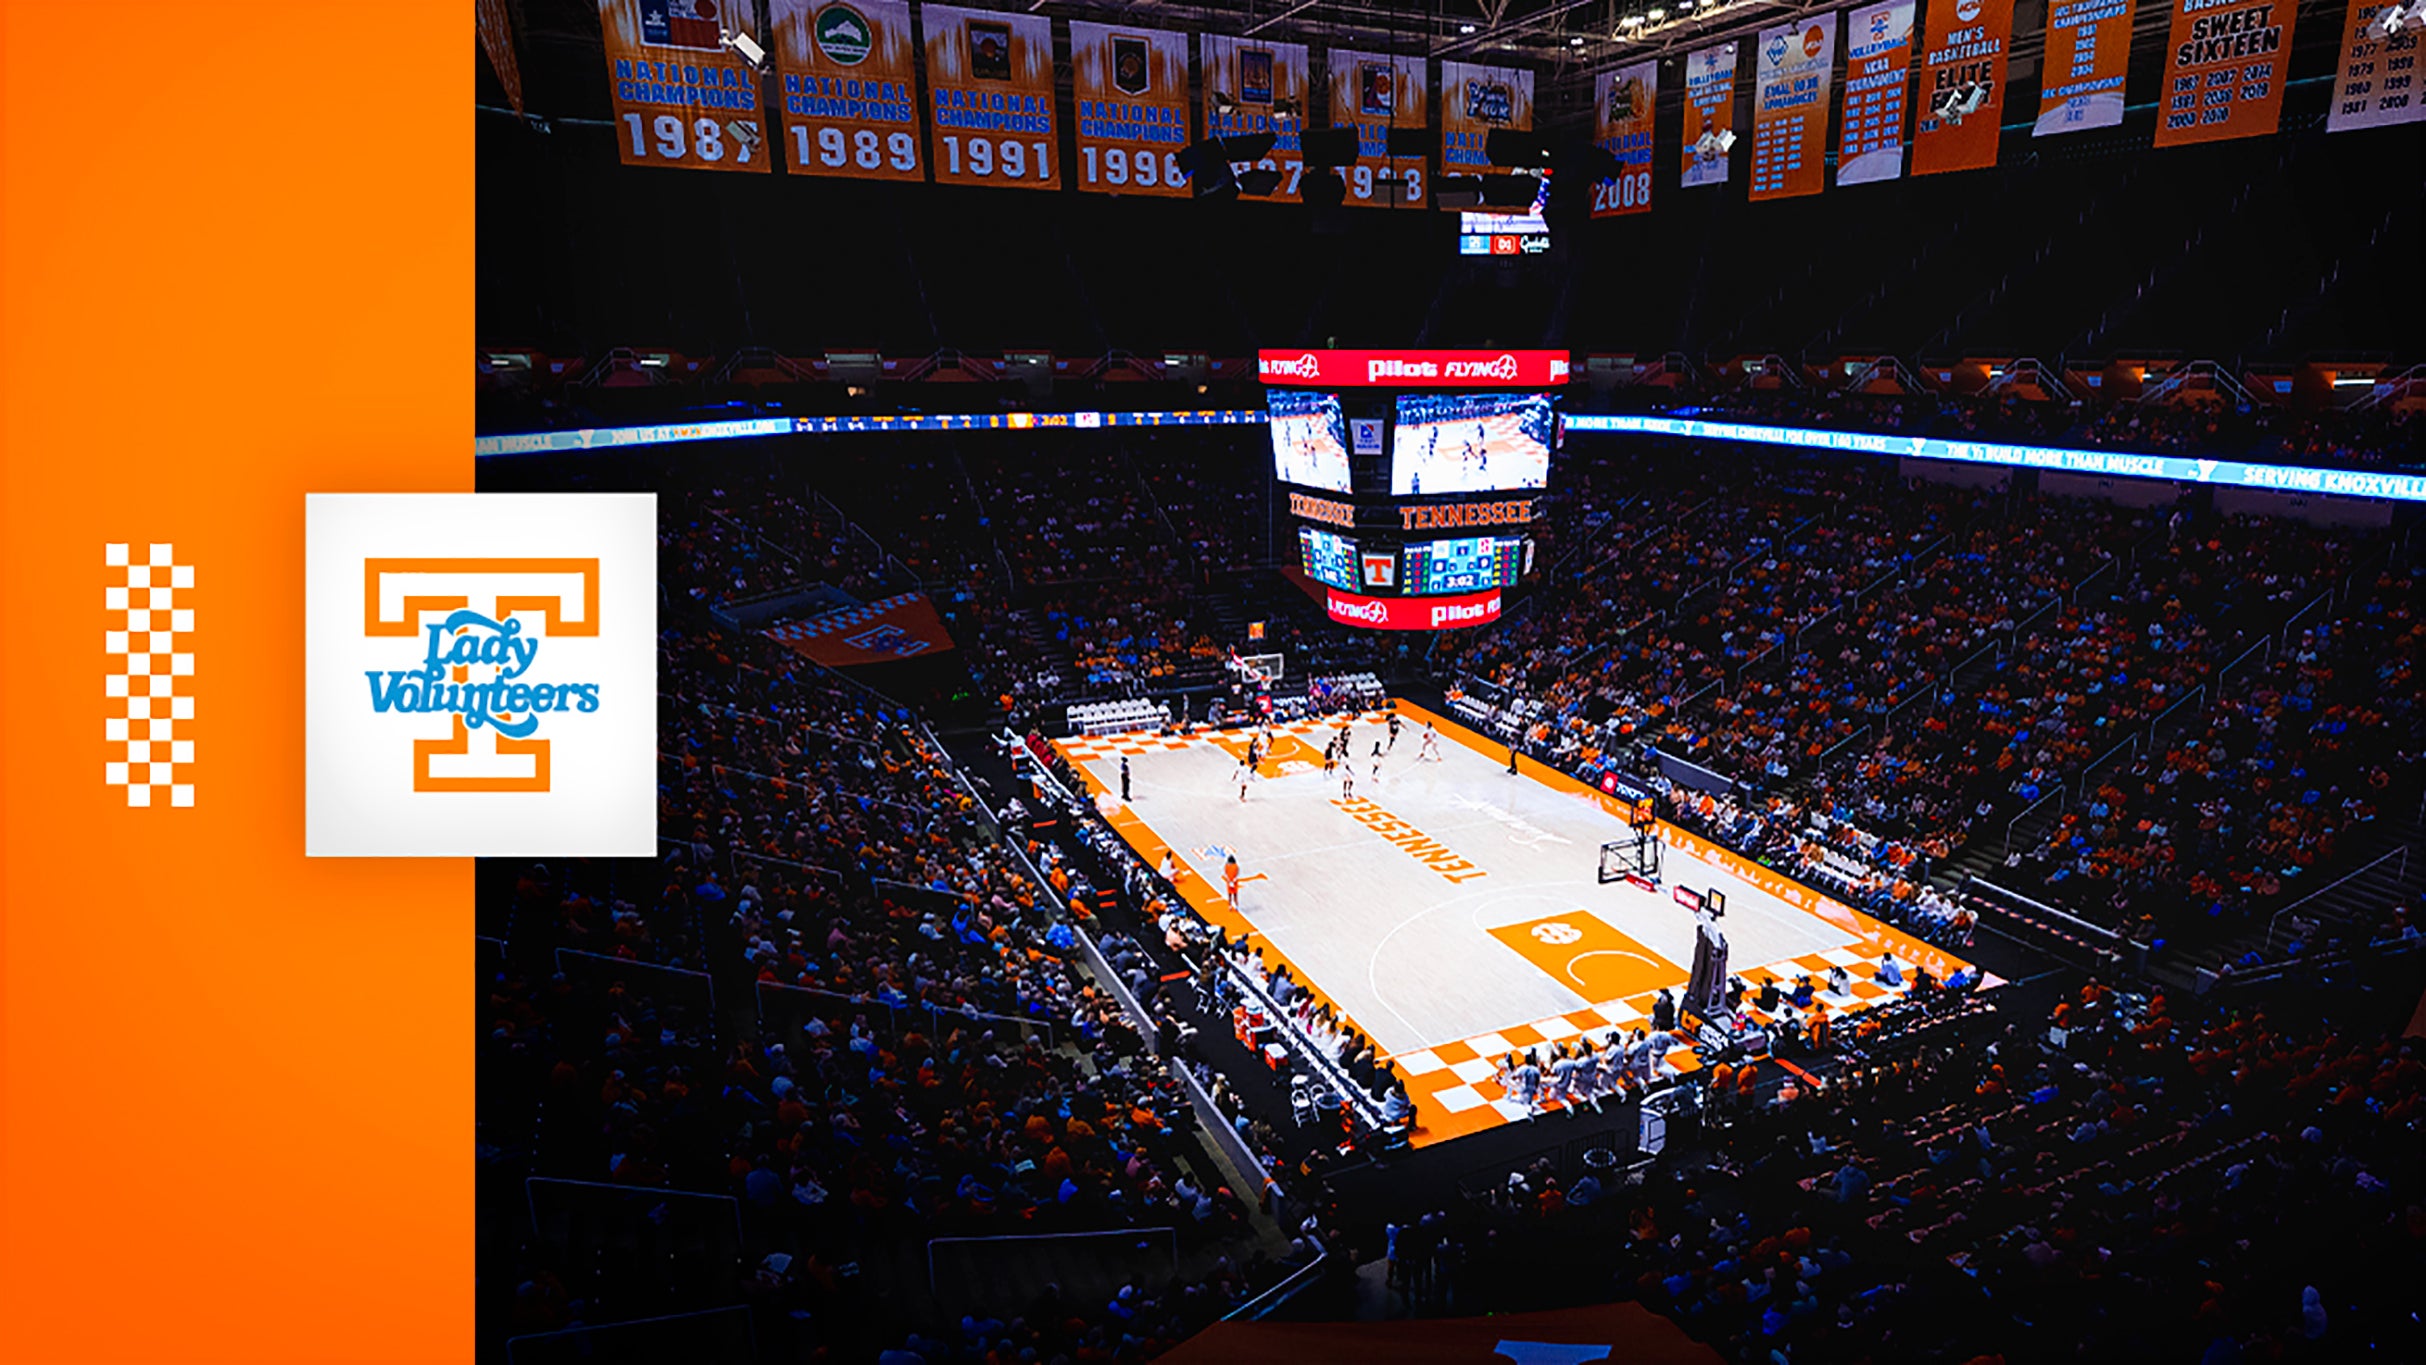 Tennessee Lady Volunteers Women's Basketball vs. Vanderbilt Commodores Womens Basketball in Knoxville promo photo for Tennessee Fund Donor presale offer code